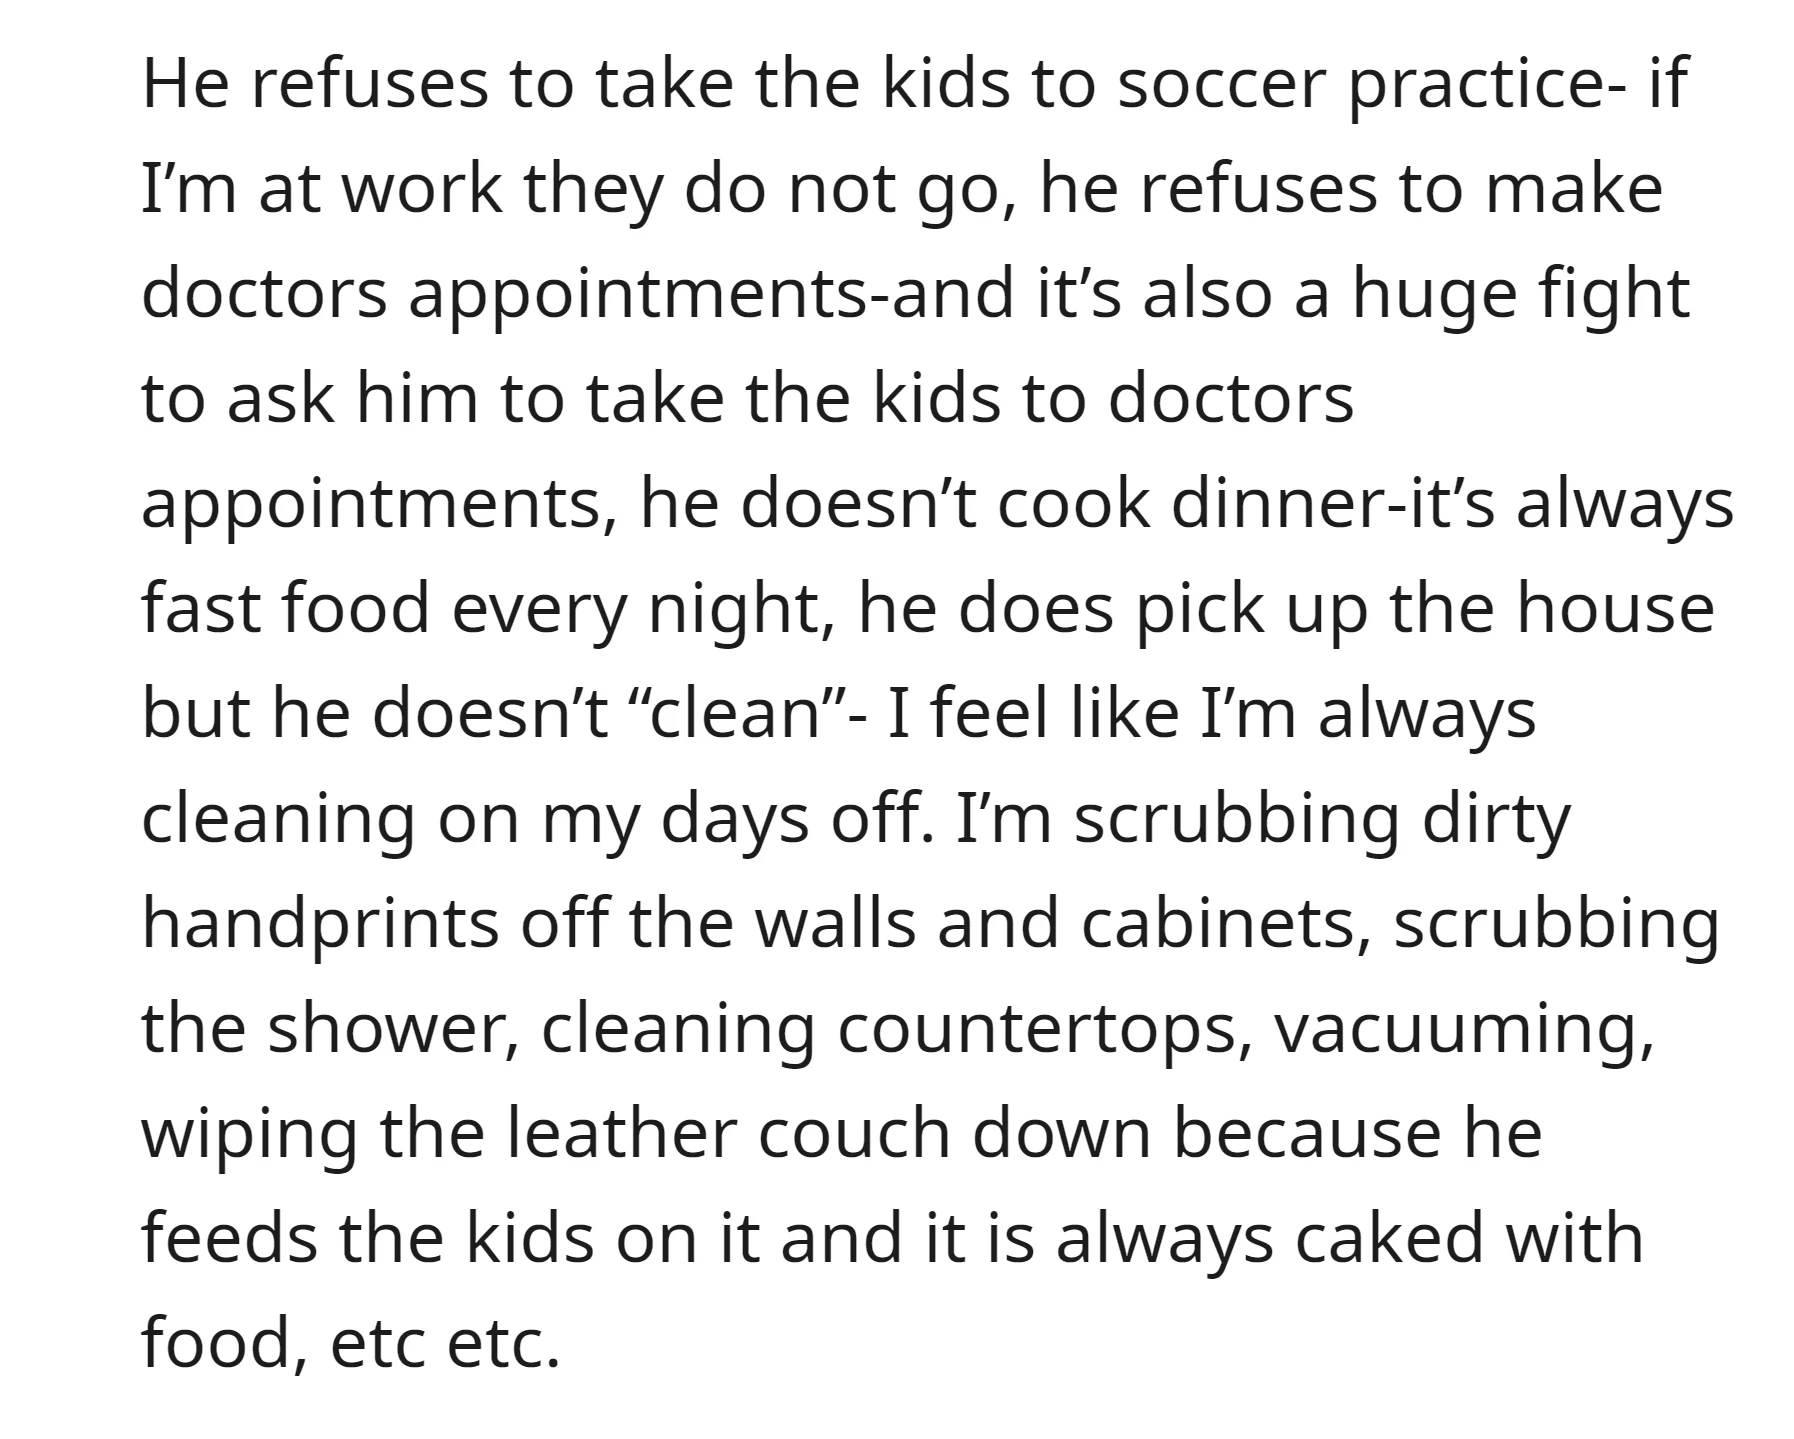 OP's husband consistently refuses to take the kids to activities, make doctor appointments, or cook dinner, leading to frequent arguments